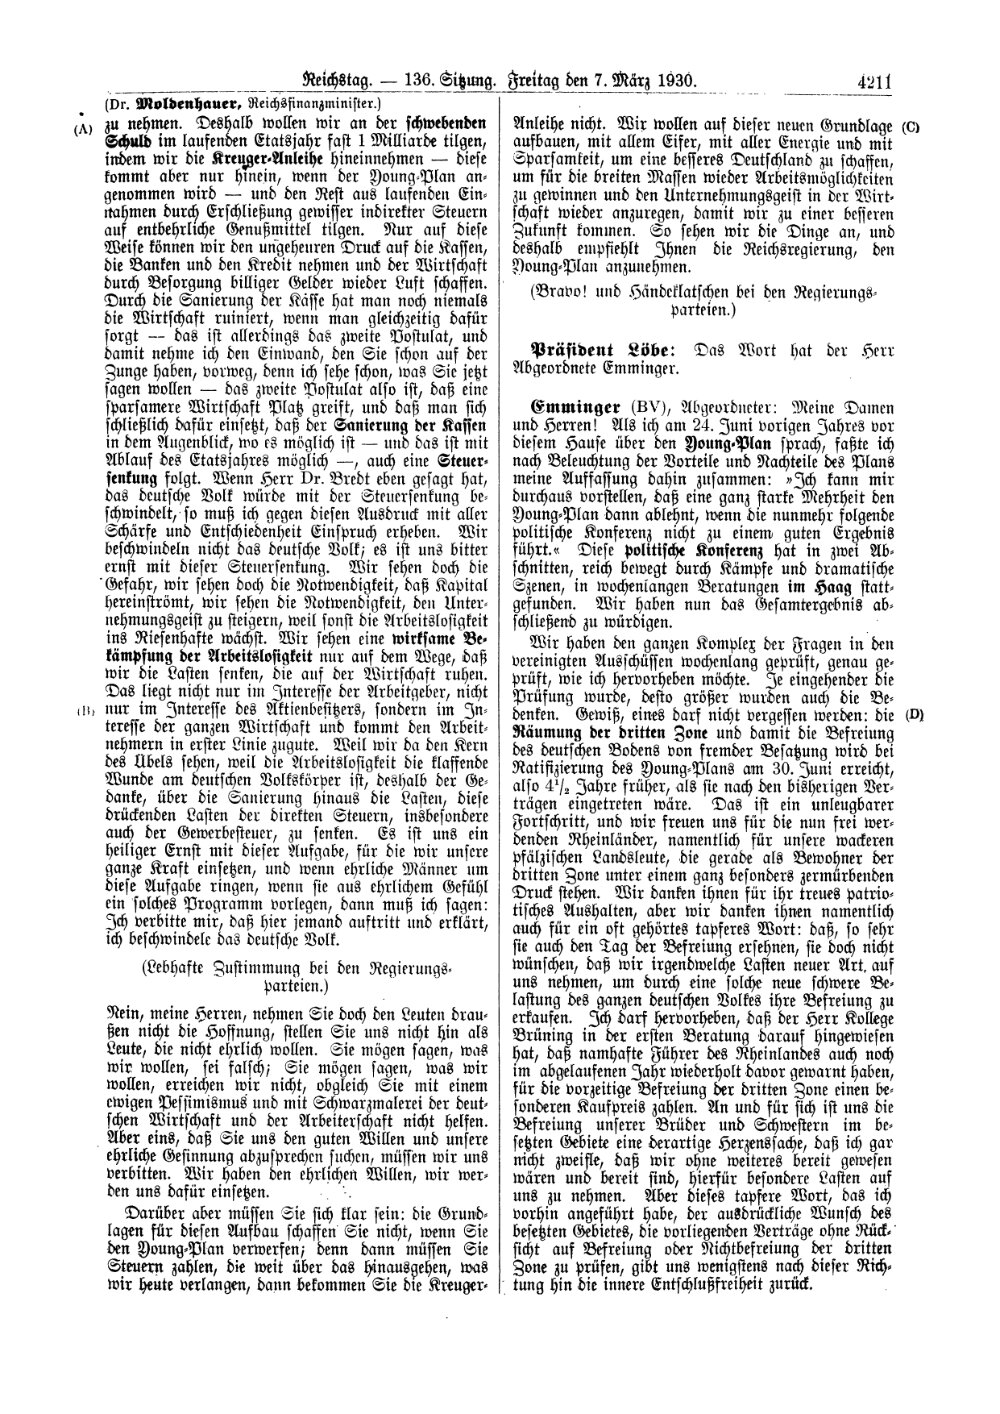 Scan of page 4211